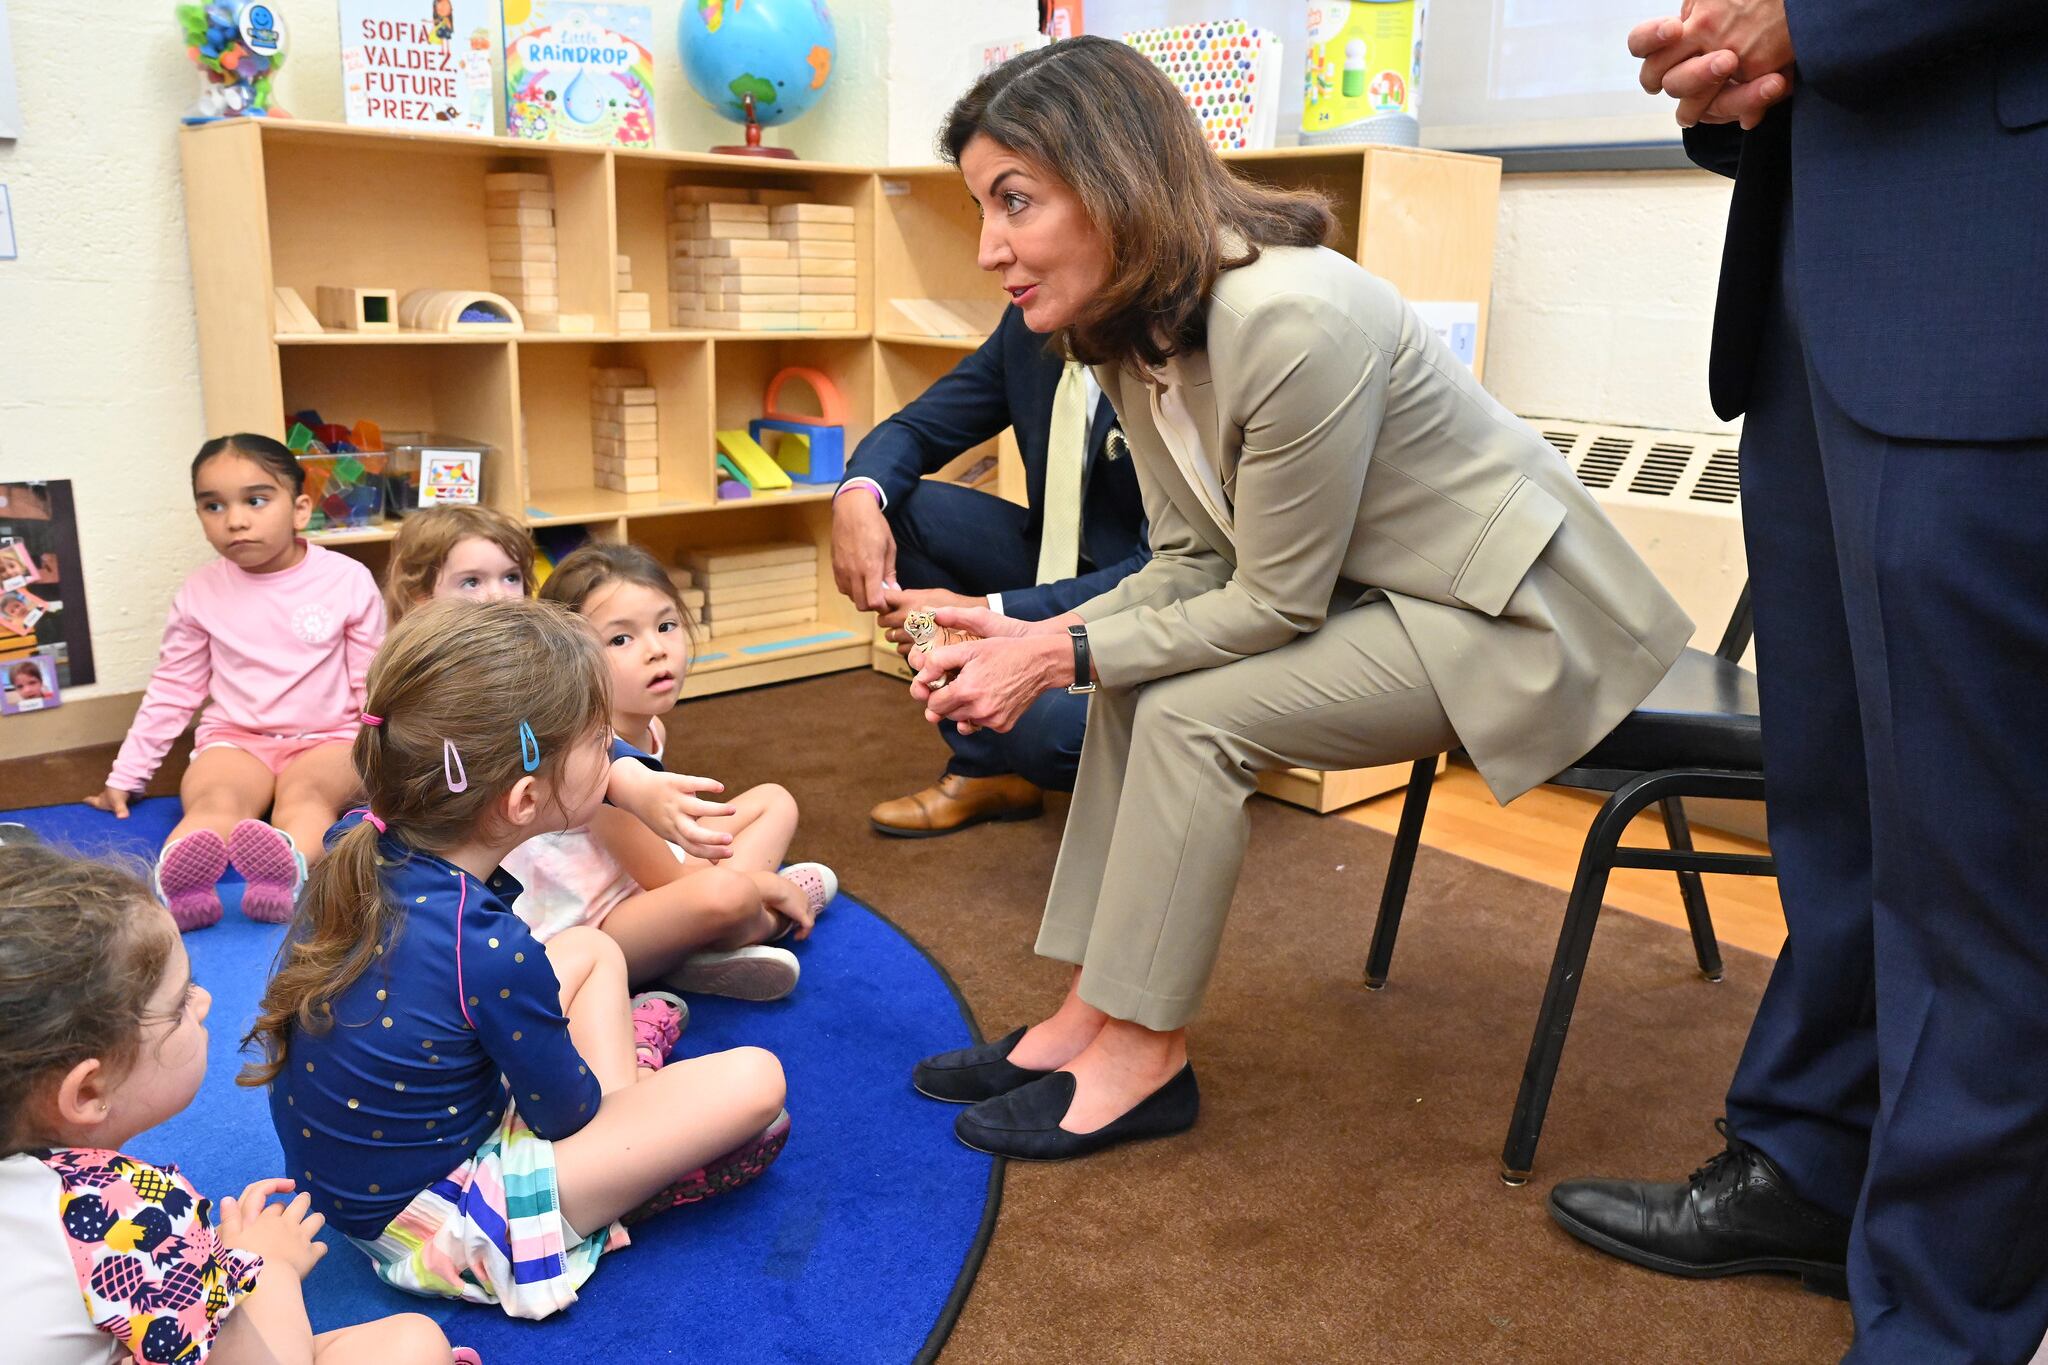 A woman in a tan suit sits on a chair and leans toward a group of young children on a carpet on the floor.